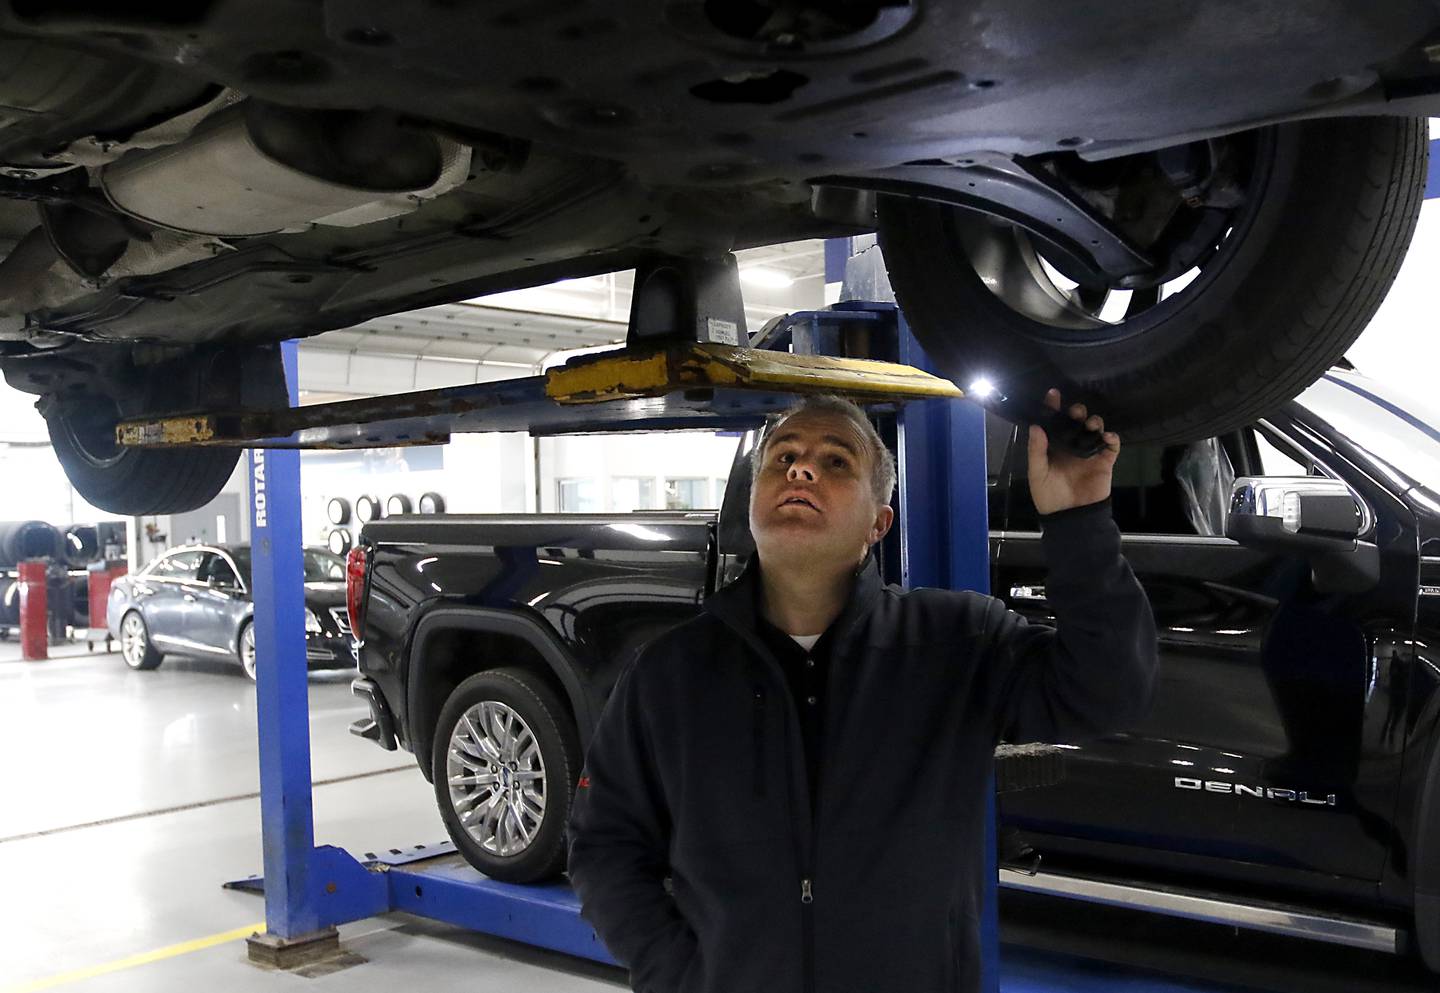 Ryan Miller, the used vehicle director at Castle AutoPlex, inspects the underside of a car Thursday, Dec. 8, 2022, at Castle AutoPlex, 1107 Route 31, in McHenry. Castle, which purchased the former Gary Lang dealership earlier this year, is looking to add two more buildings to the campus in the next couple of years for import brands.